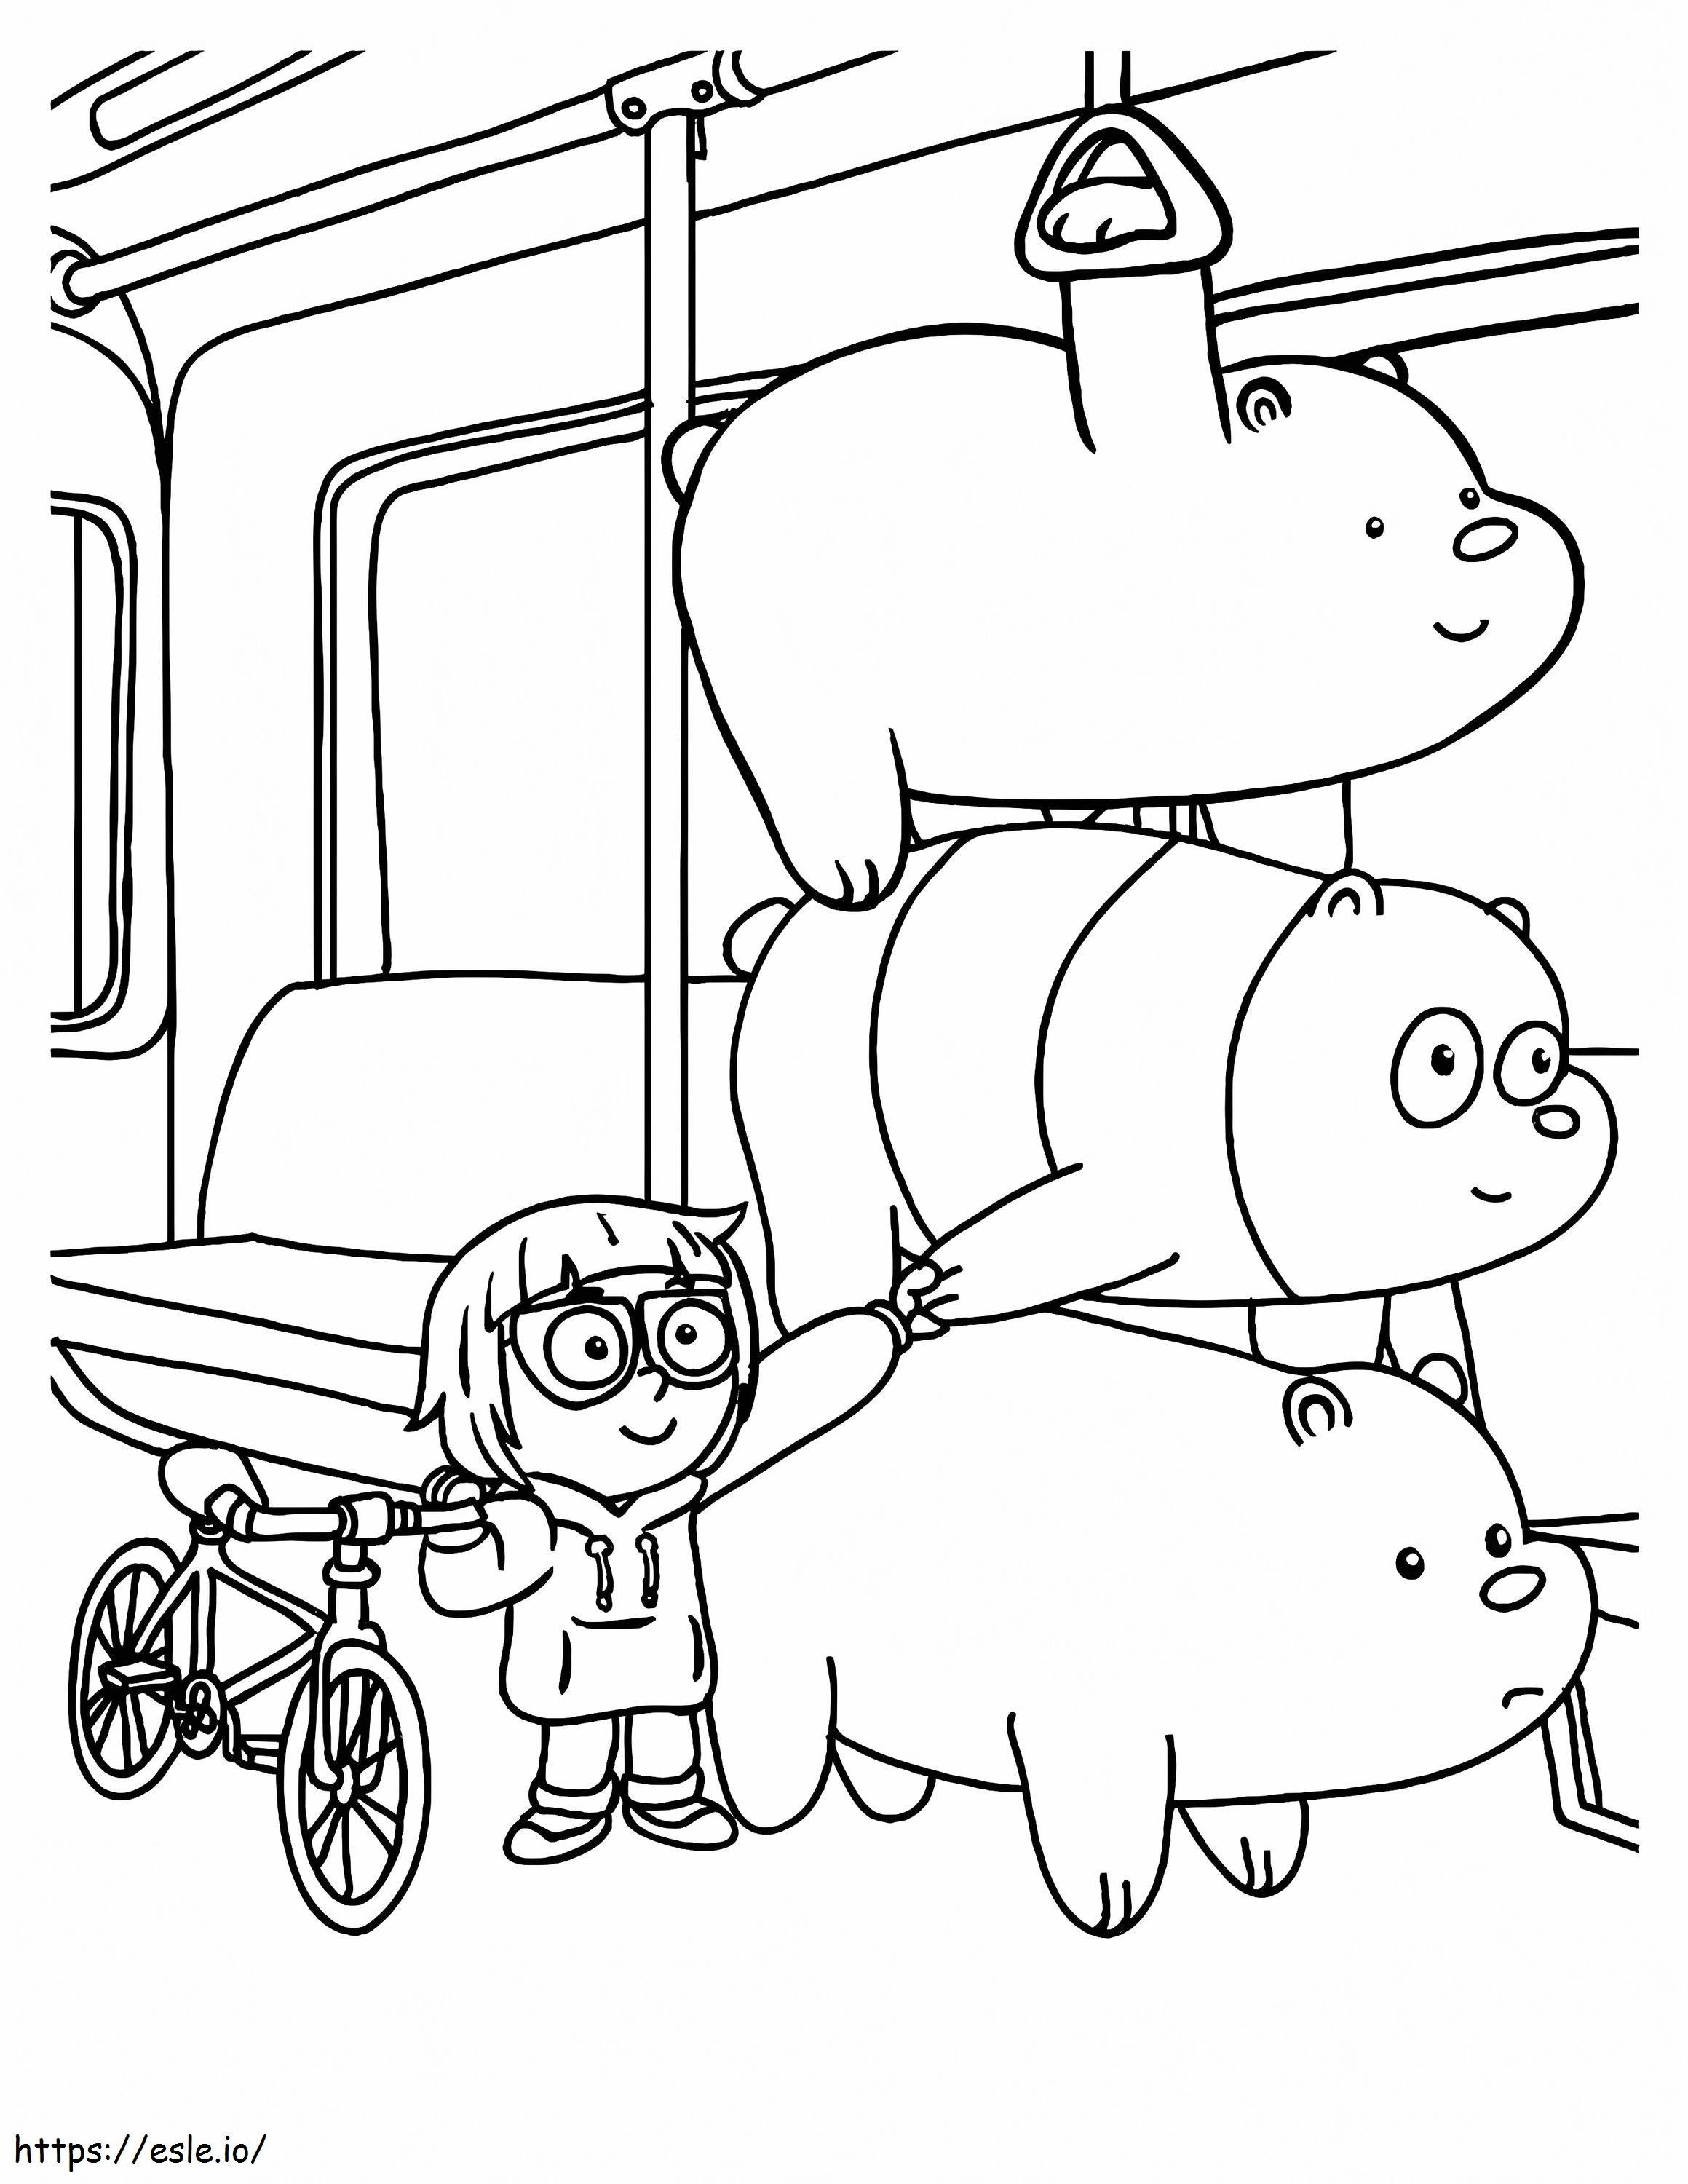 Bears V3262 We Bare Bears We Bare Bears We Bare Bears Coloring Sheets Bare Pooh Bear Colouring Pages Online coloring page